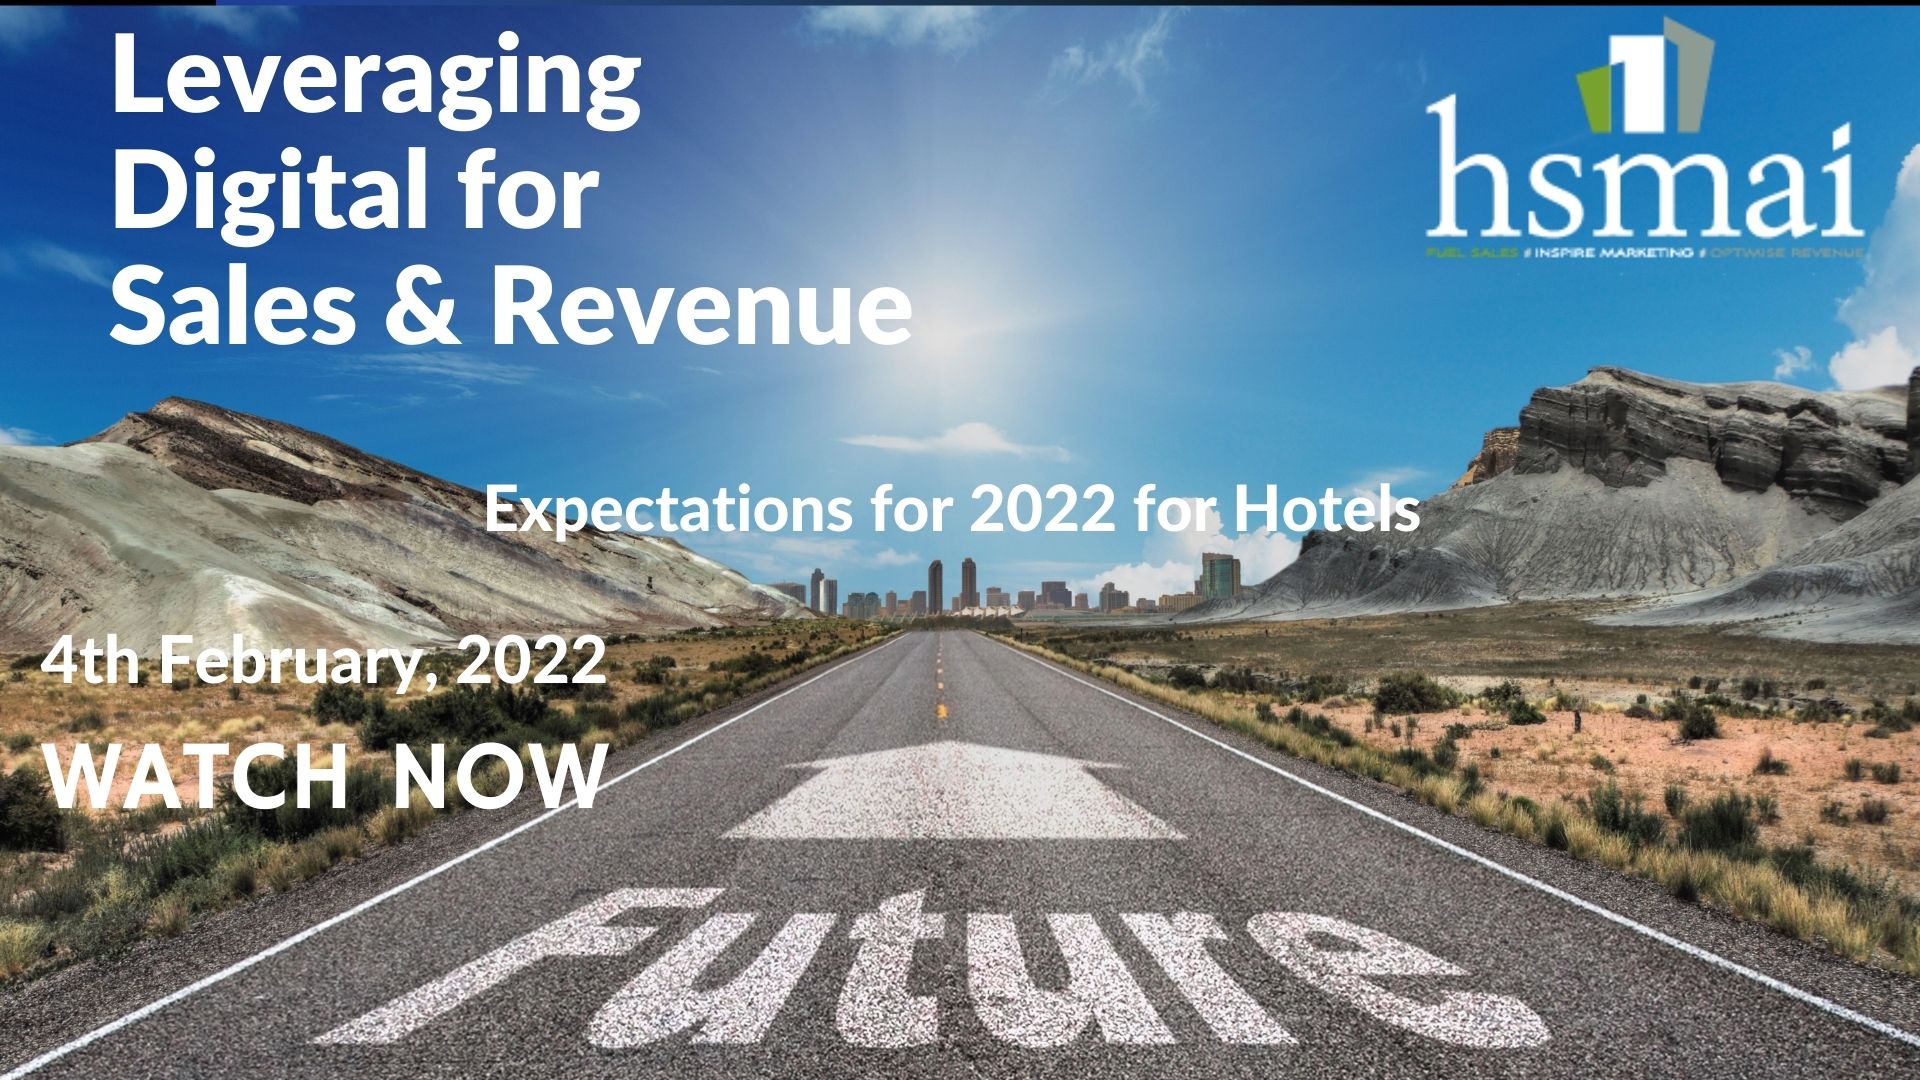 “Leveraging digital for Sales and Revenue” – a free webinar for Hotels and Resorts